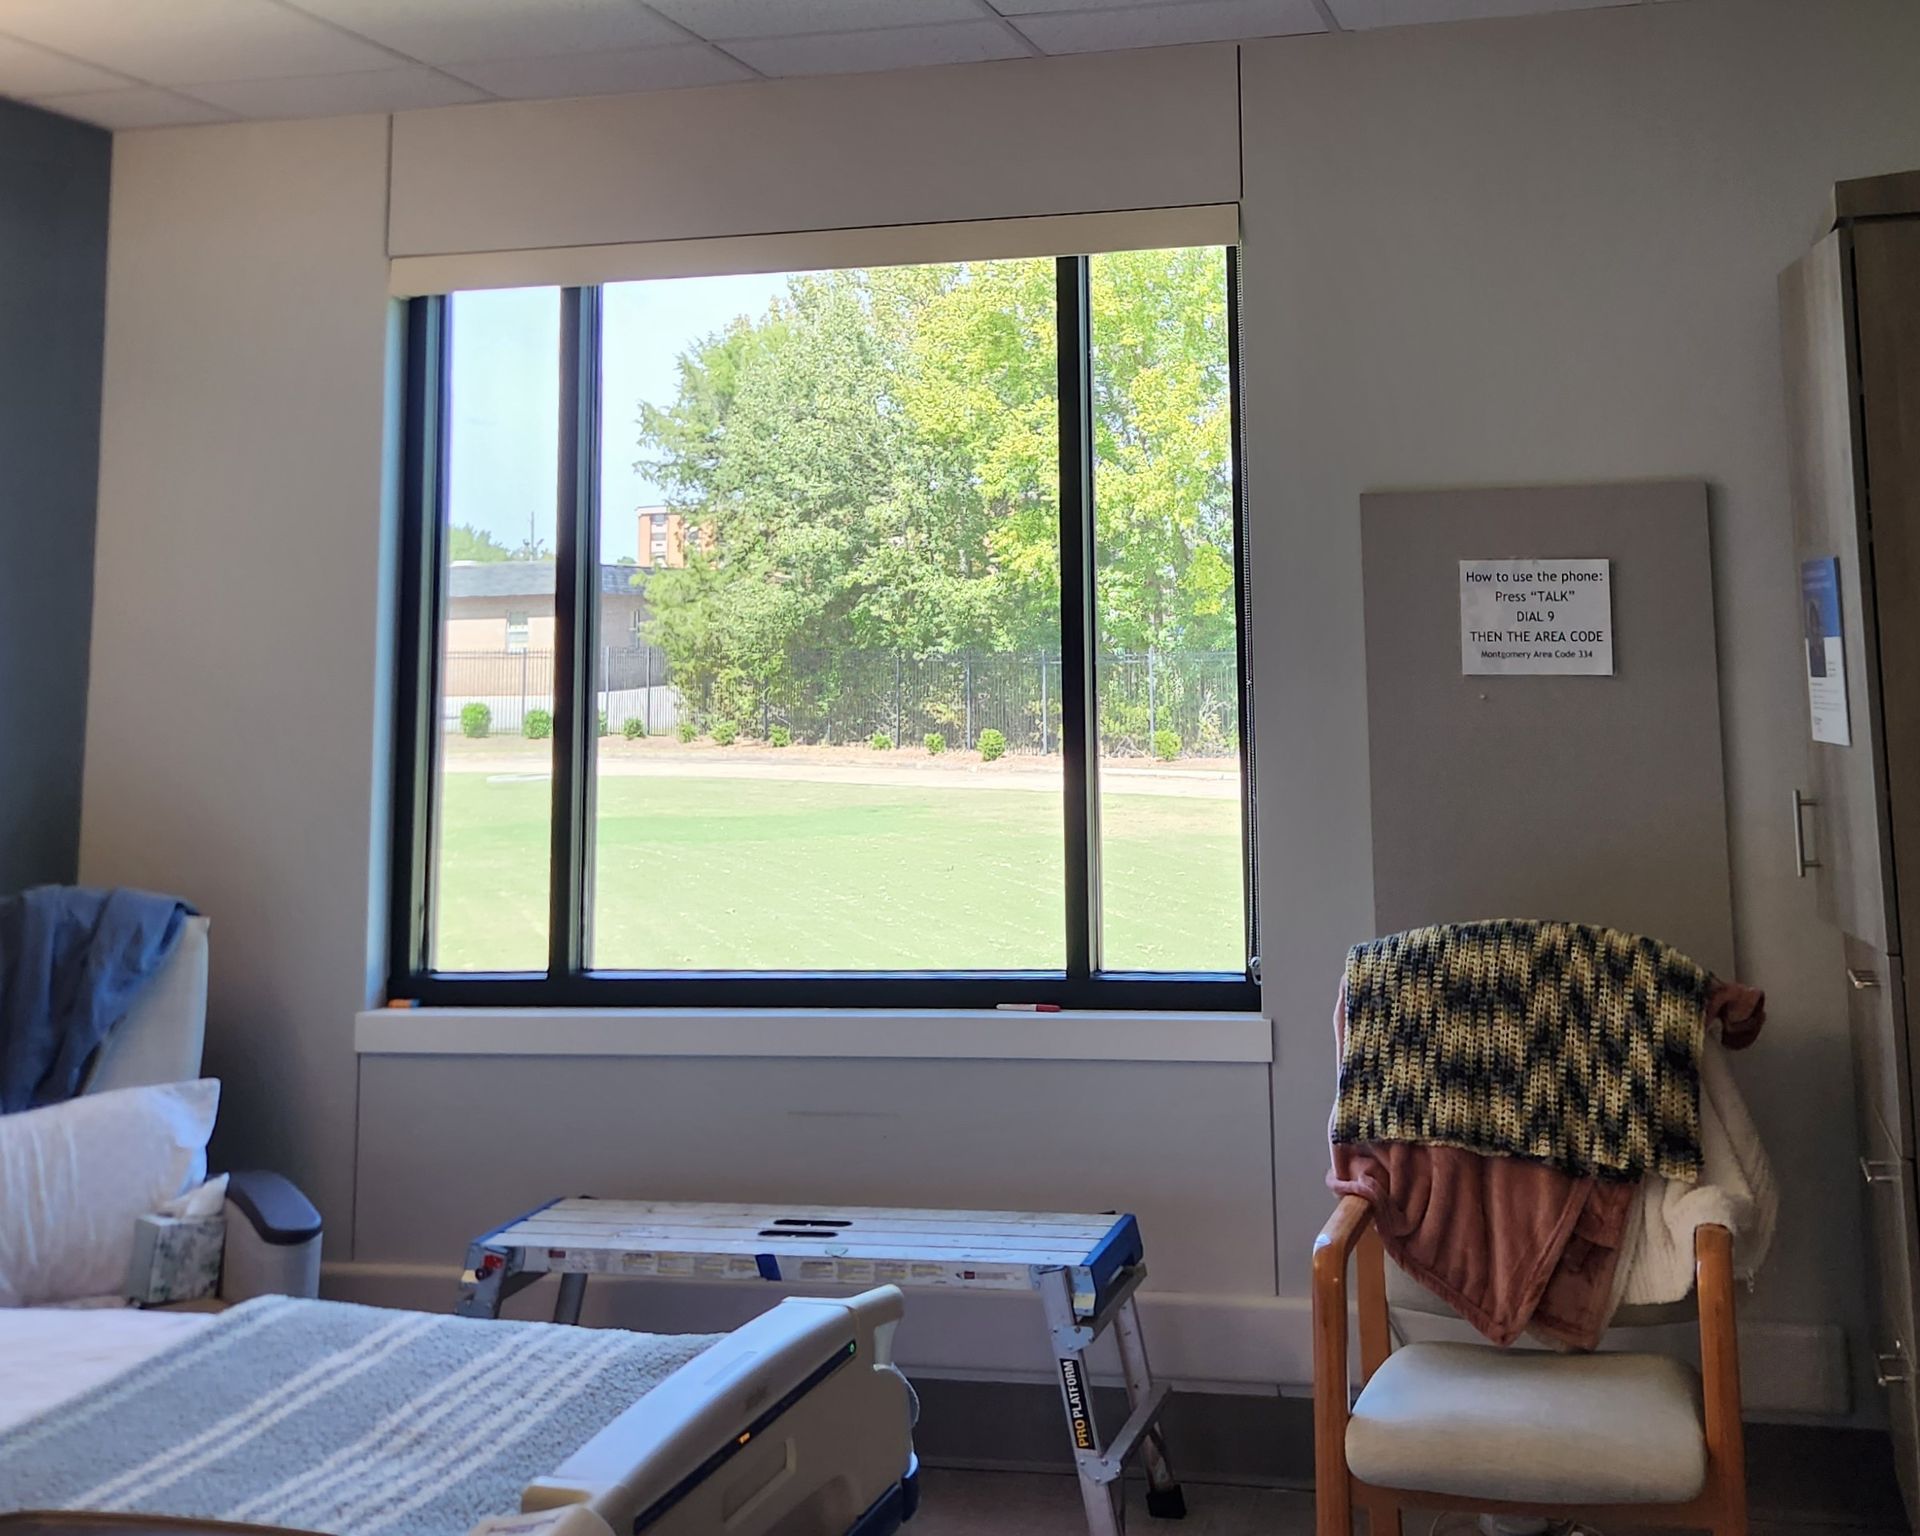 Bright hot Sun was entering through Encompass Health's windows limiting the advantages of the open view. Until SPF Tint in Montgomery, AL